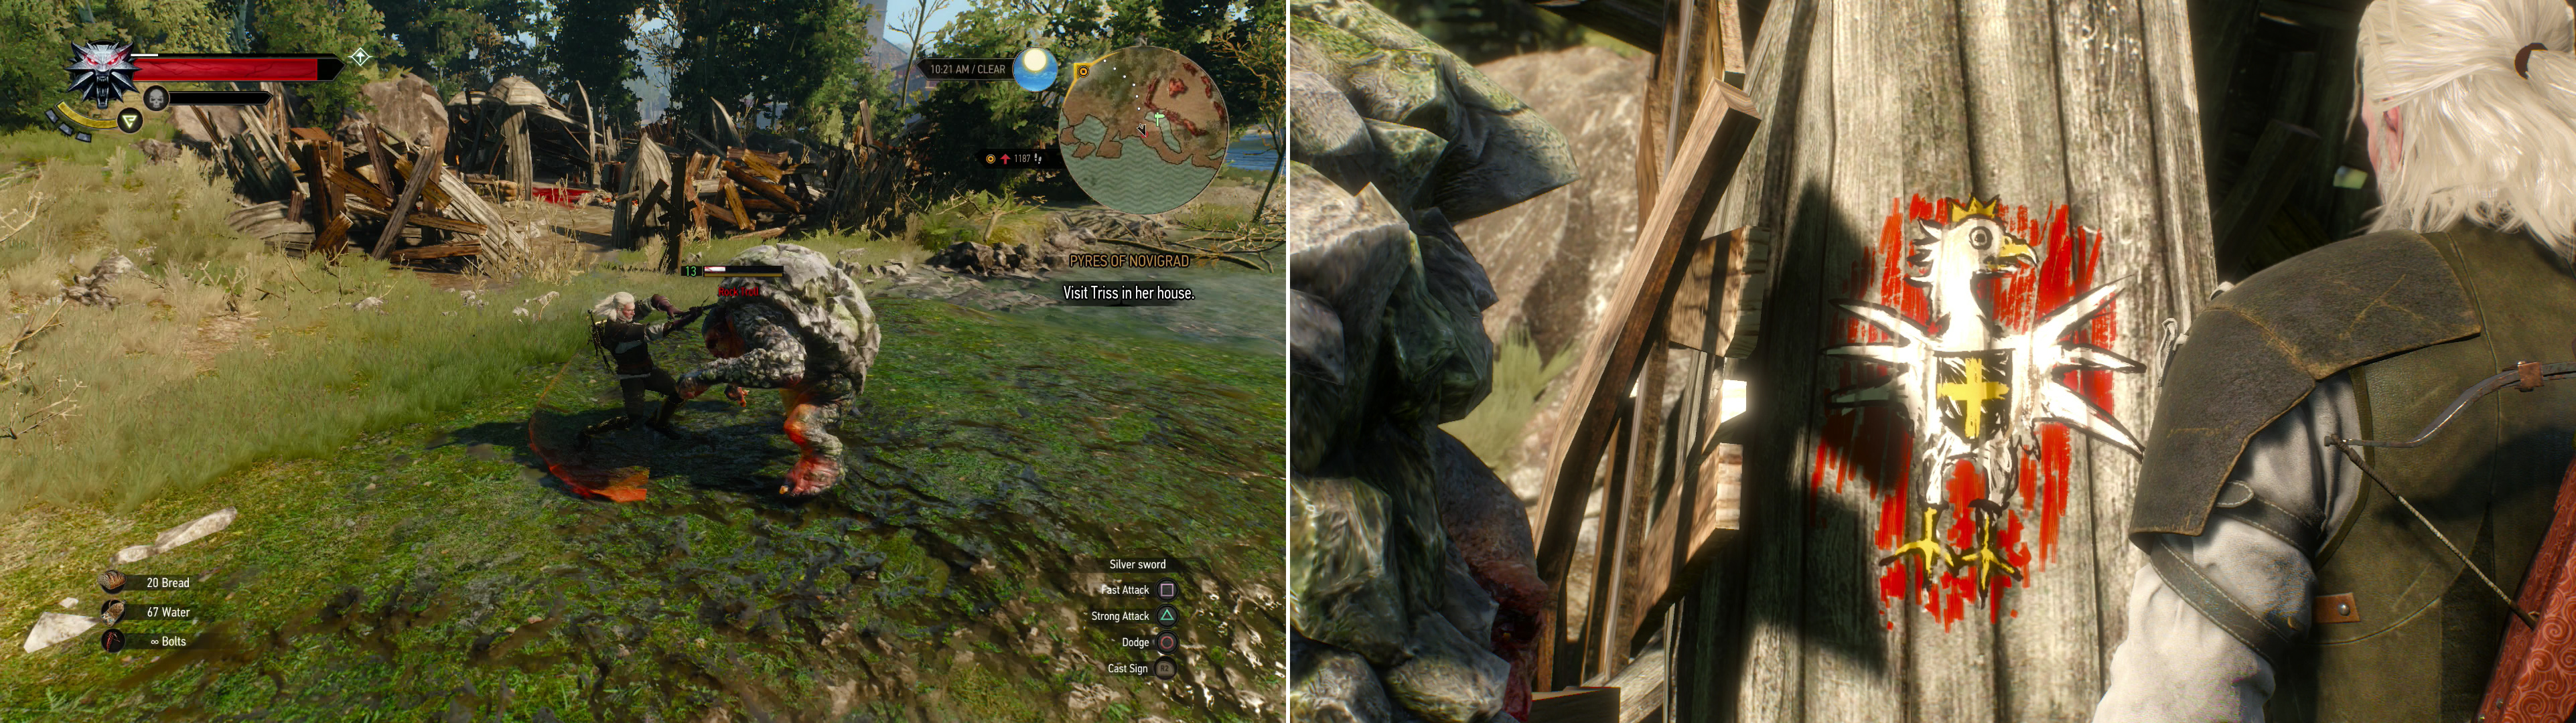 Either kill the Troll at White Eagle Fort (left) or help it set the camp to correct military order (right). Just… don’t let Geralt paint if you don’t want to torture art.